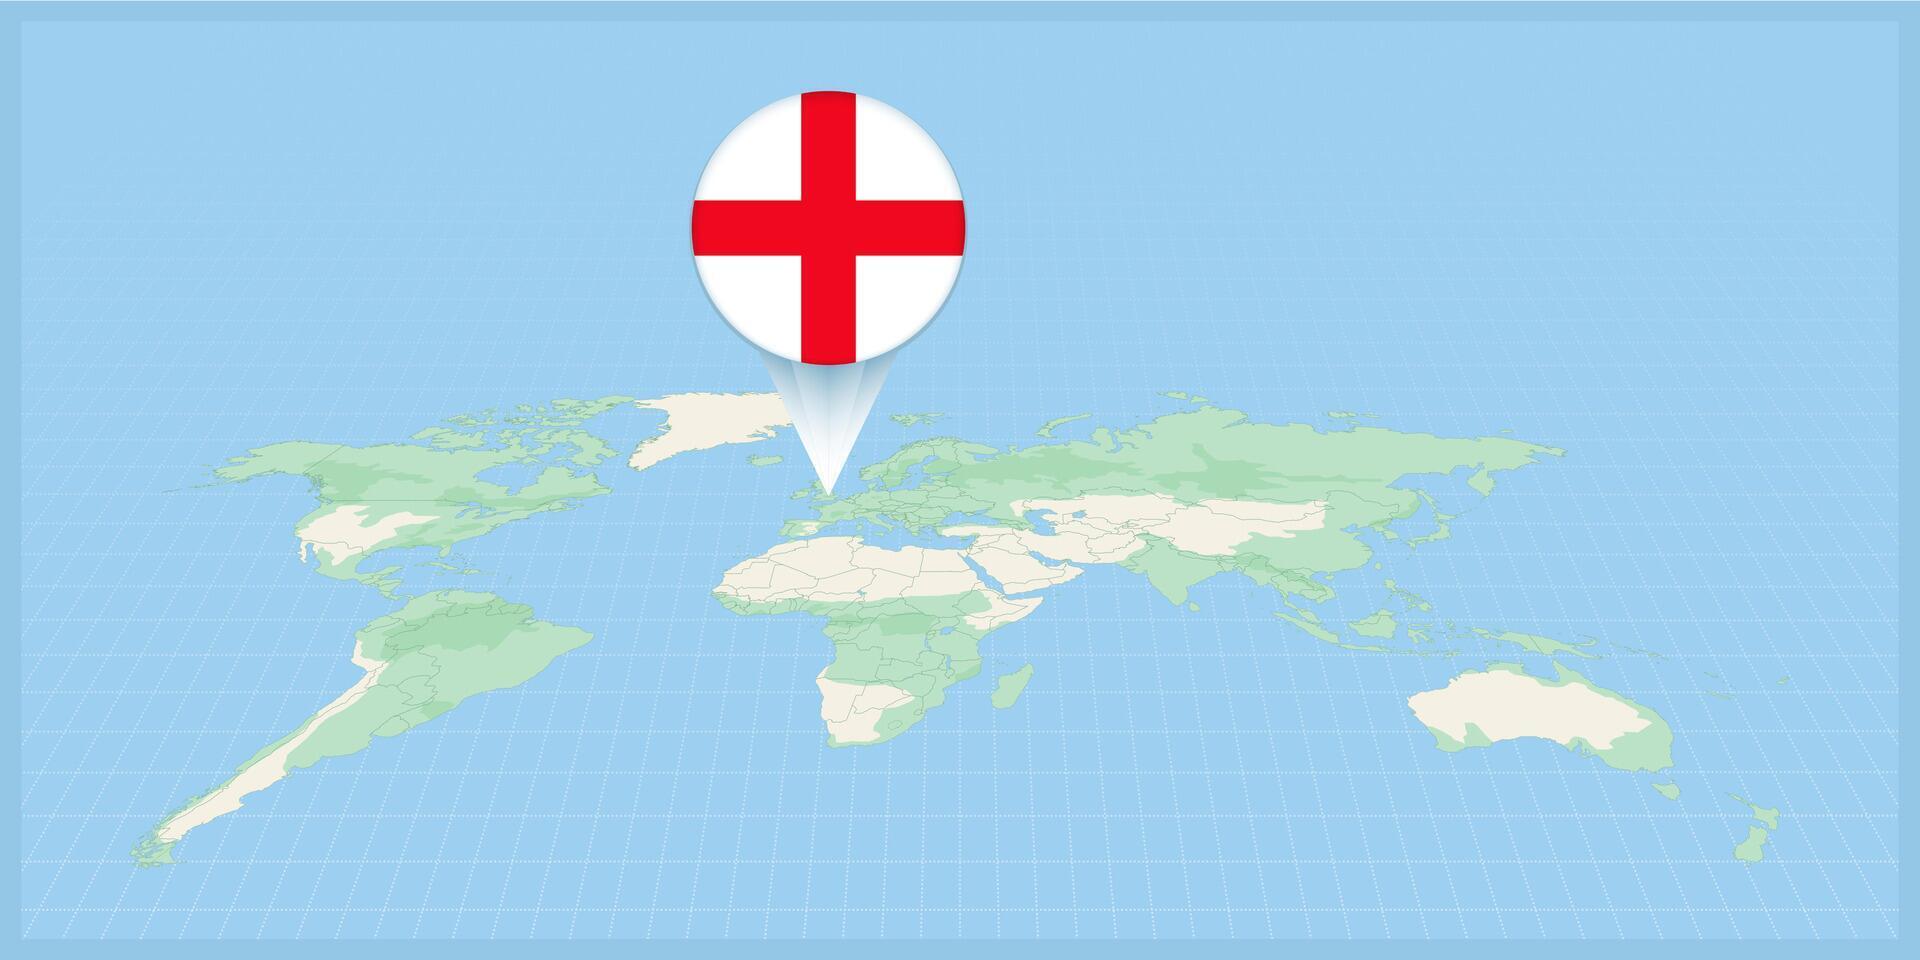 Location of England on the world map, marked with England flag pin. vector